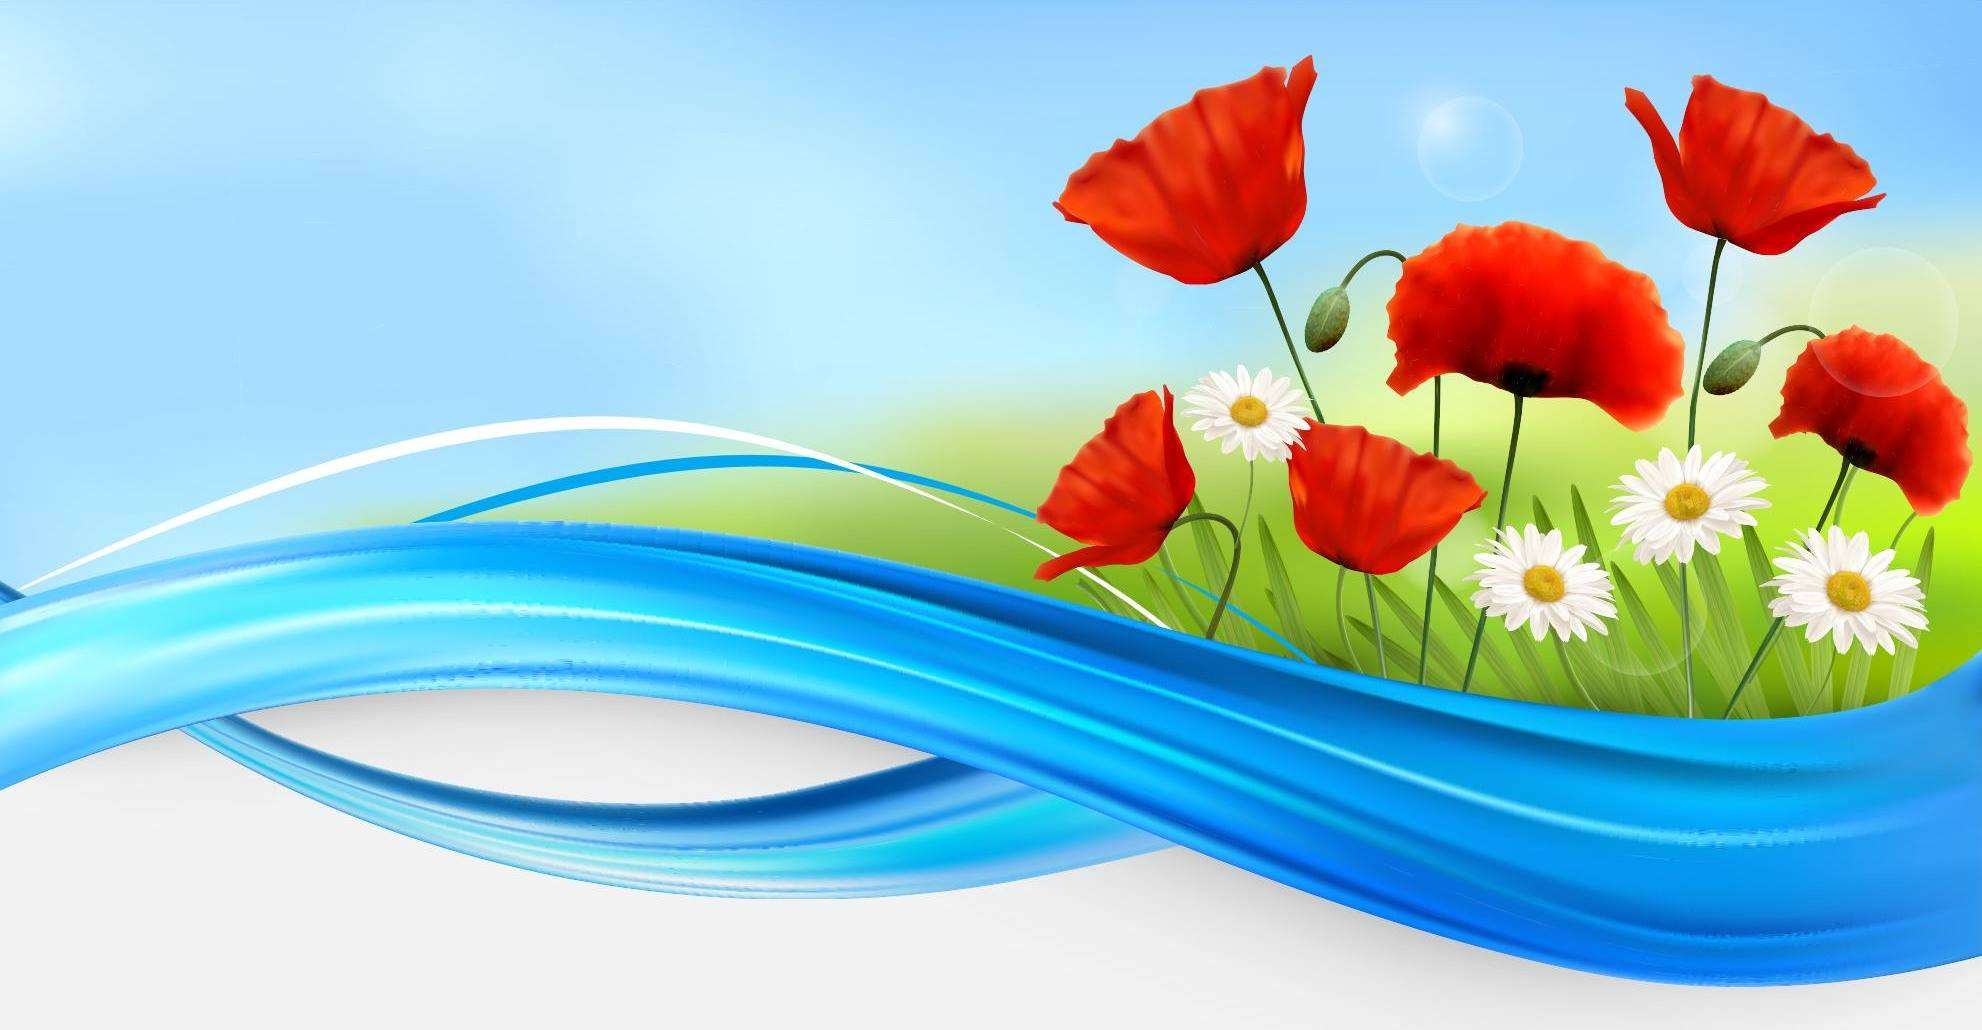 Flower Background 04 png